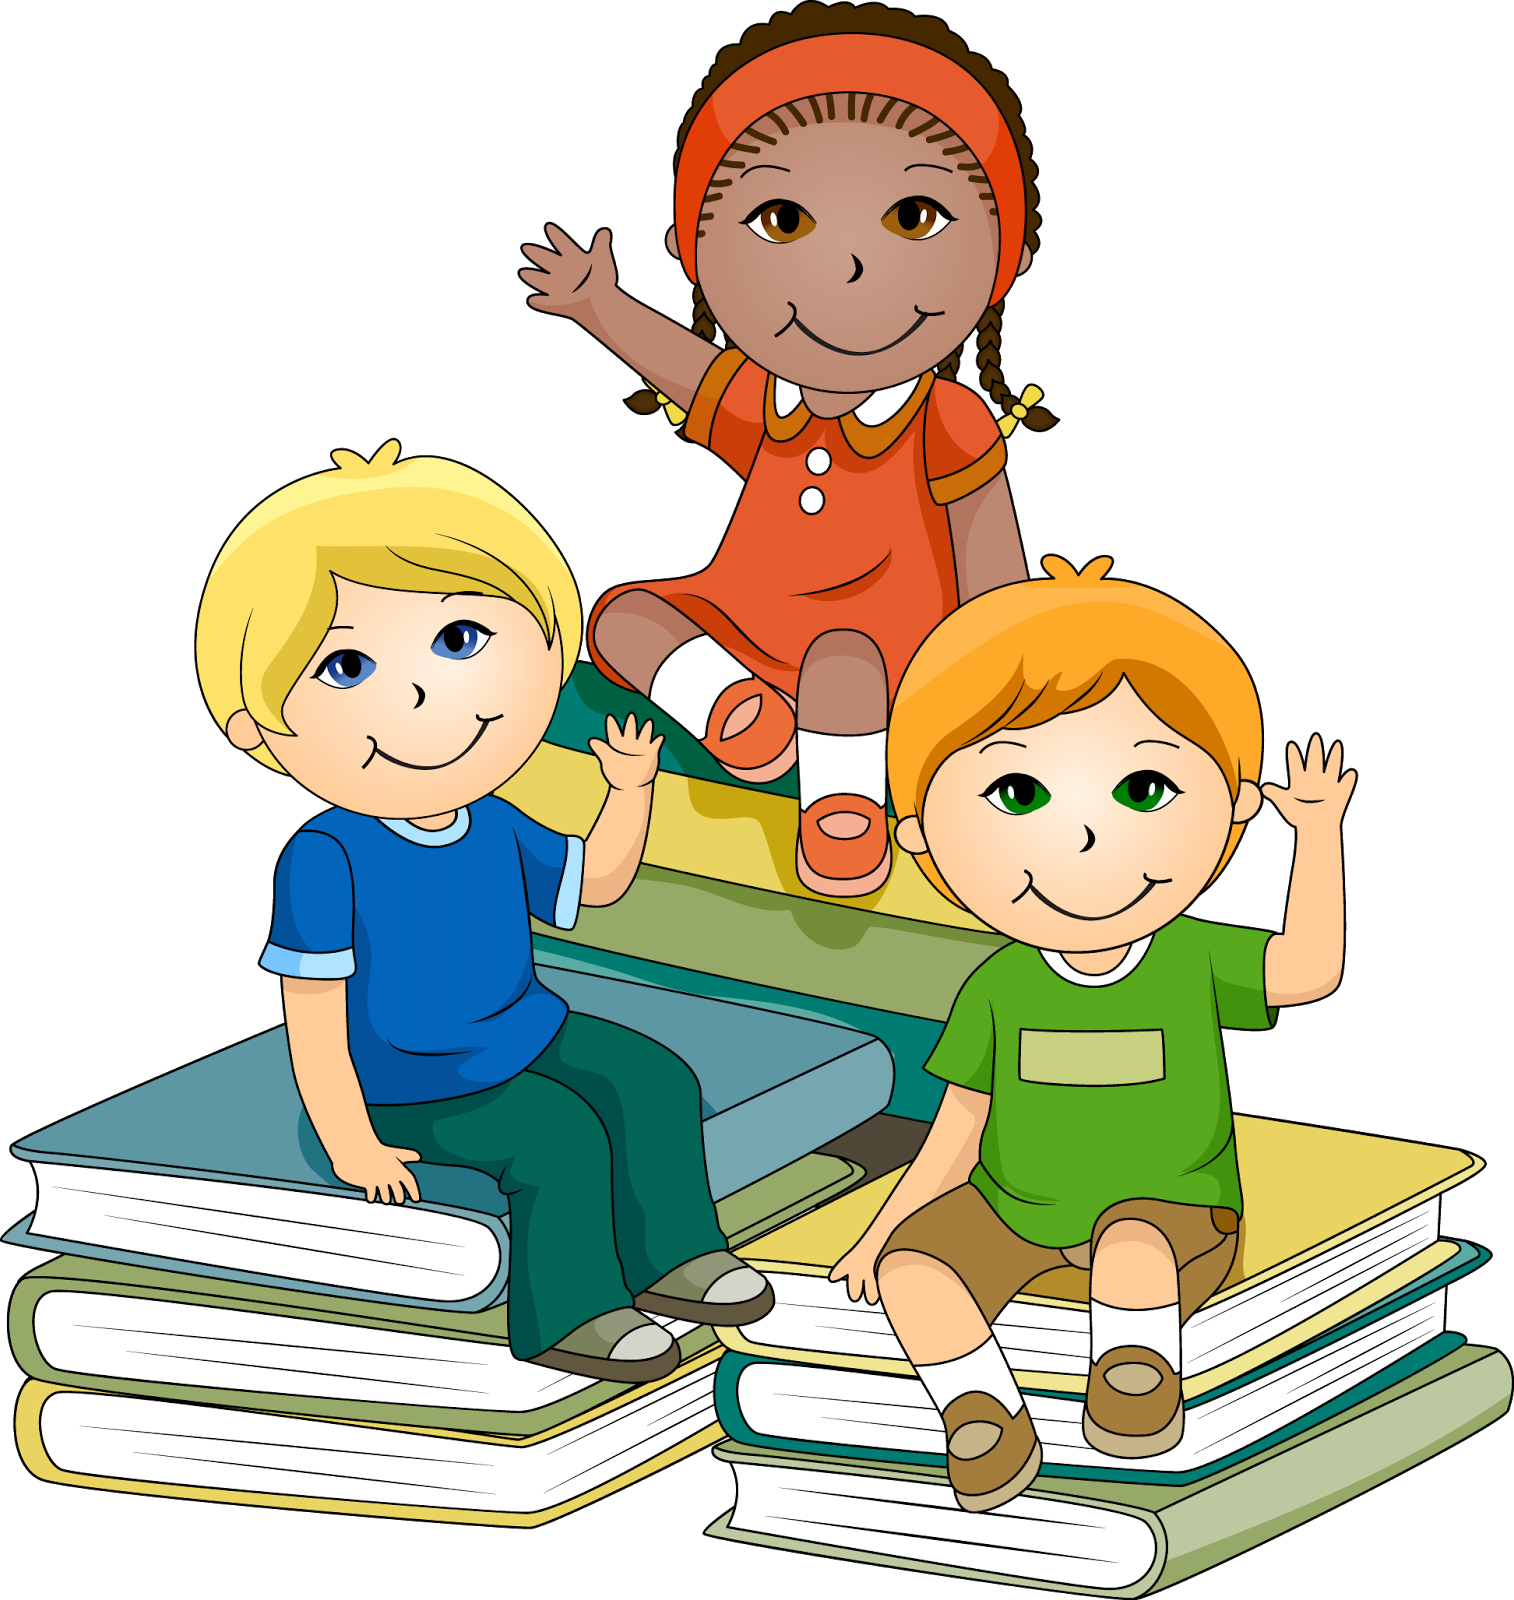 Pictures Of Children Reading Books - Clipart library